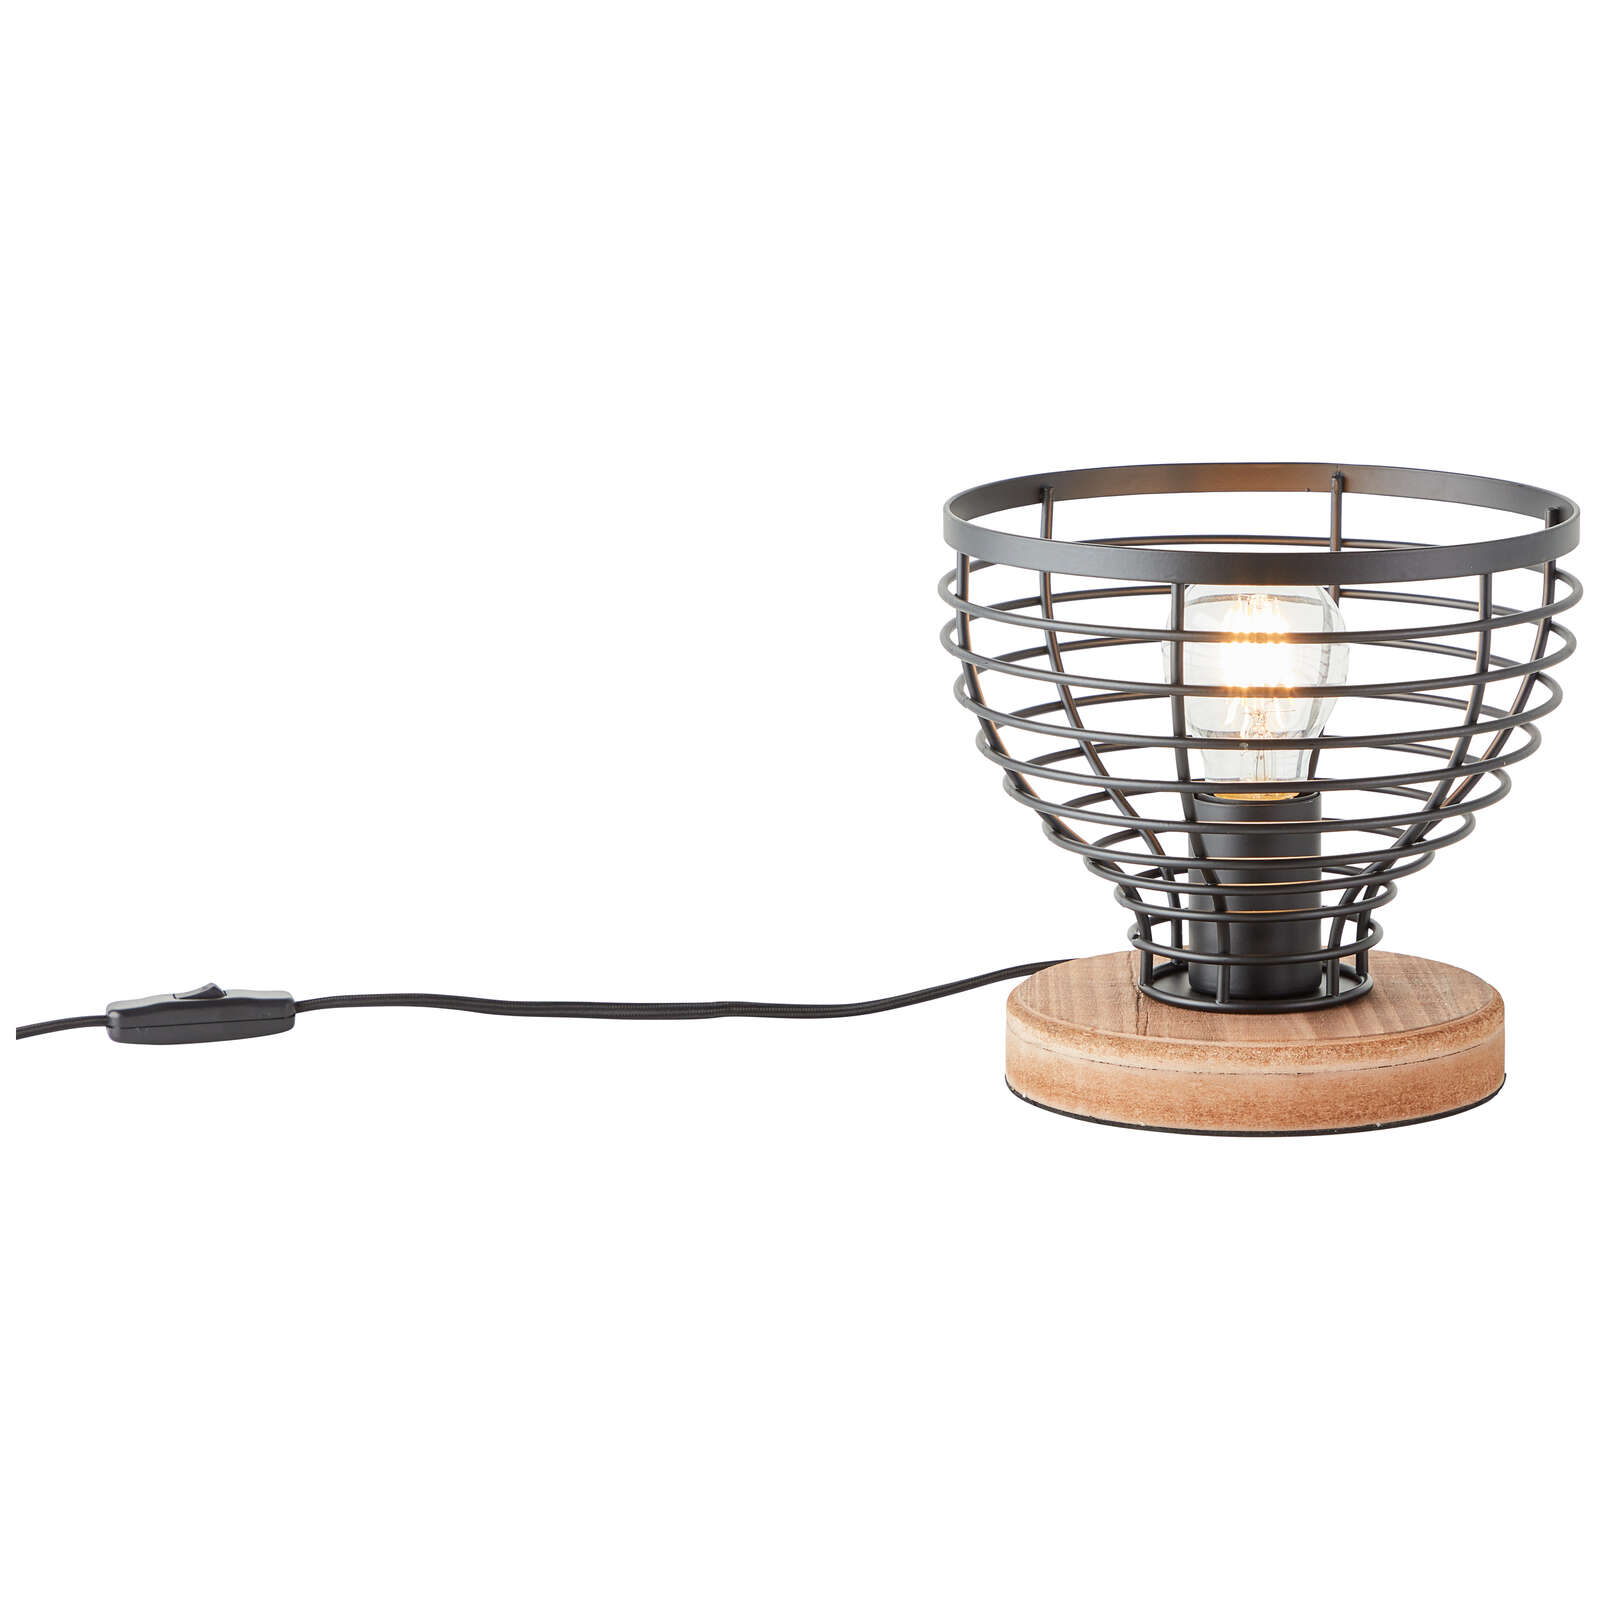             Wooden table lamp - Annelie 10 - Brown
        